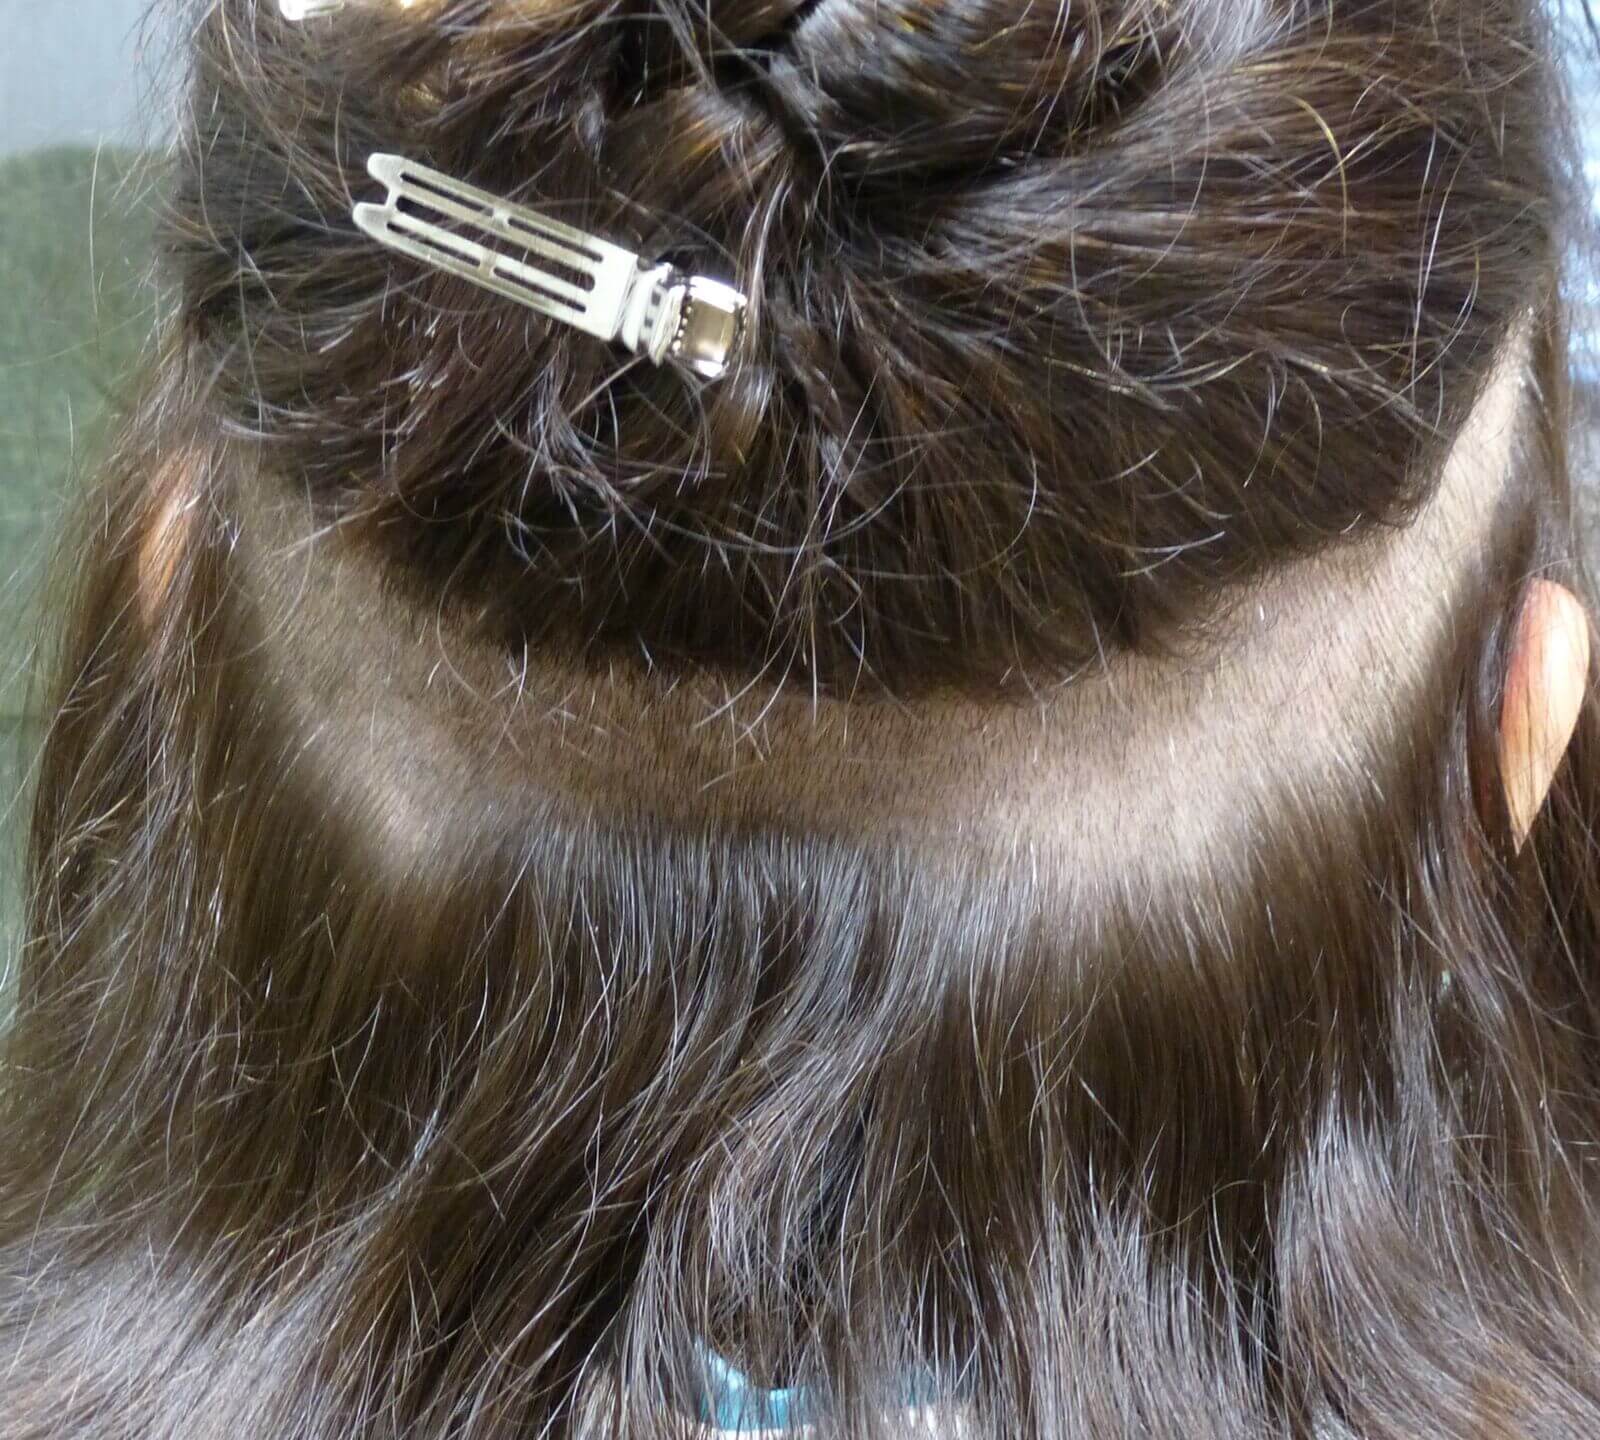 This is an example of a strip excision that is done for patients with long hair. The area is excised and then the edges are sutured back together. This prevents having to shave a large donor site.